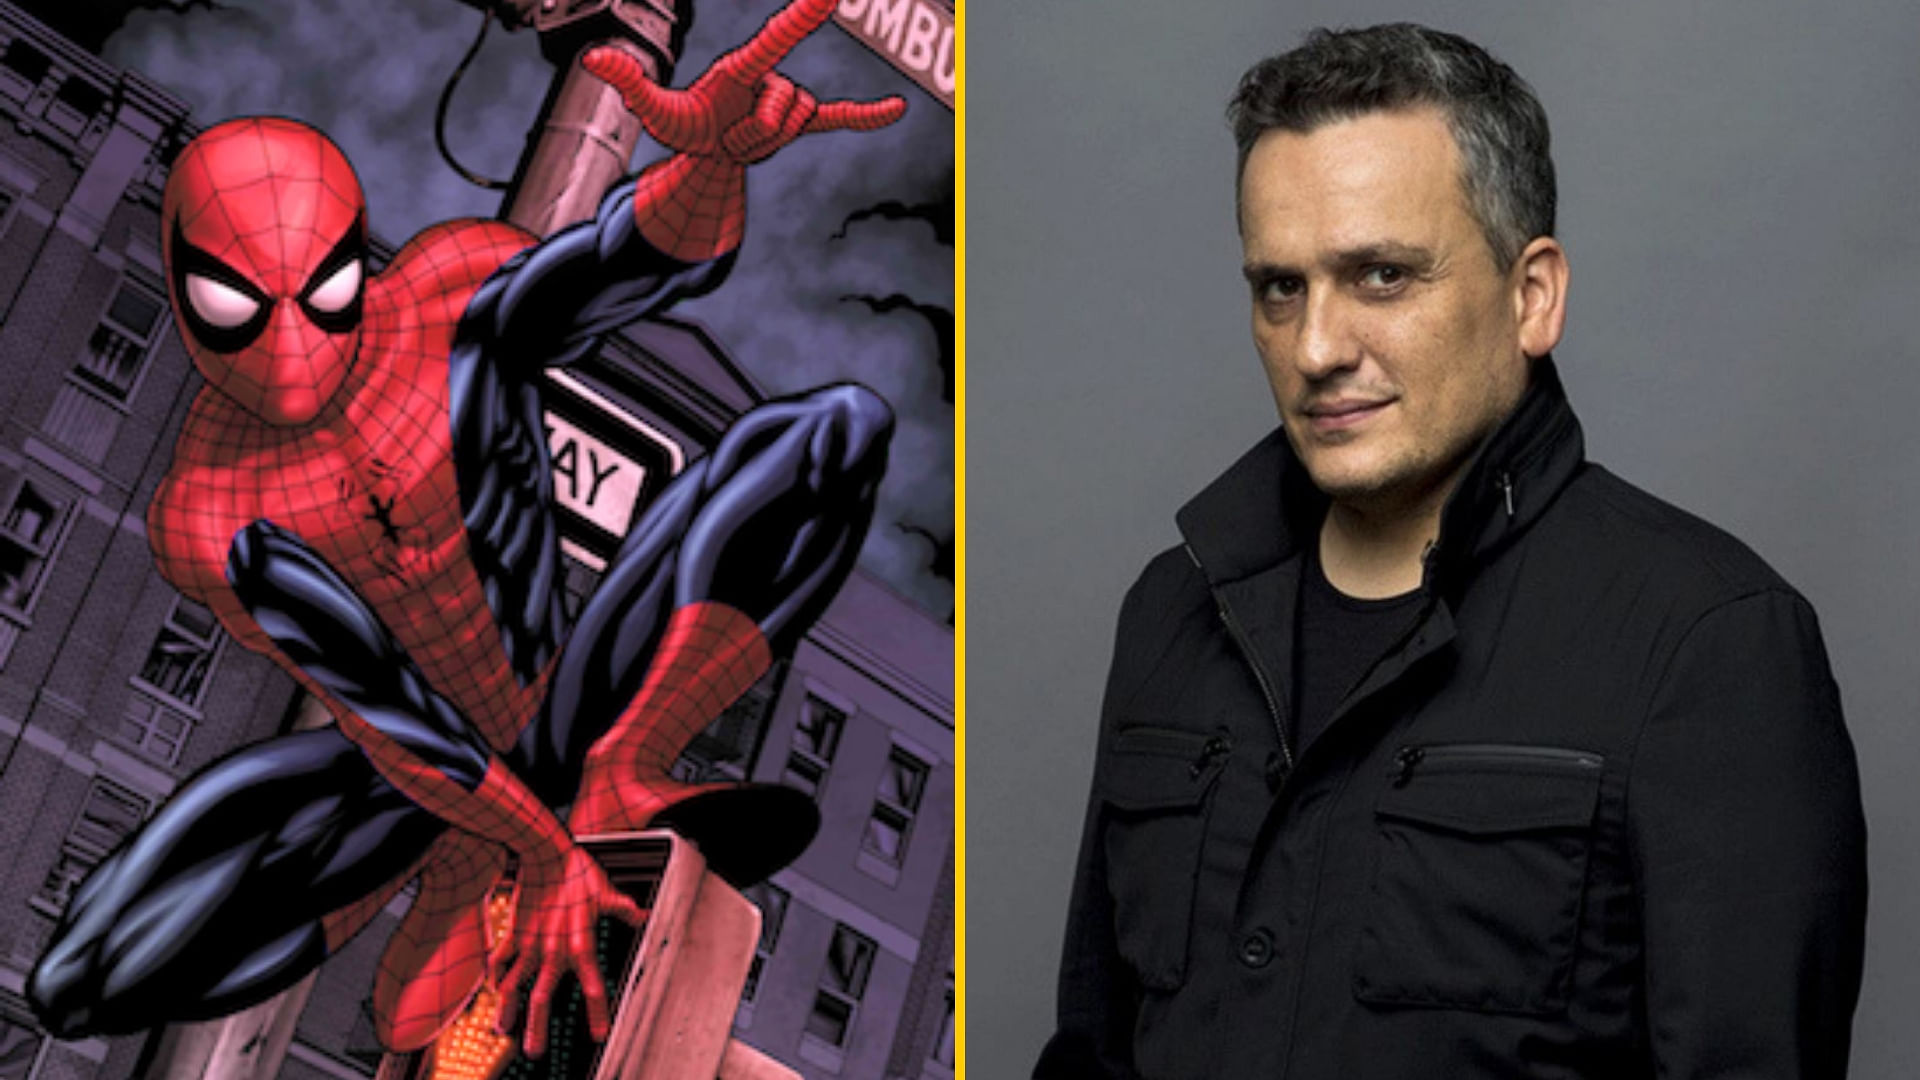 Joe Russo, along with his brother Anthony, has helmed four films in the Marvel&nbsp; Cinematic Universe.